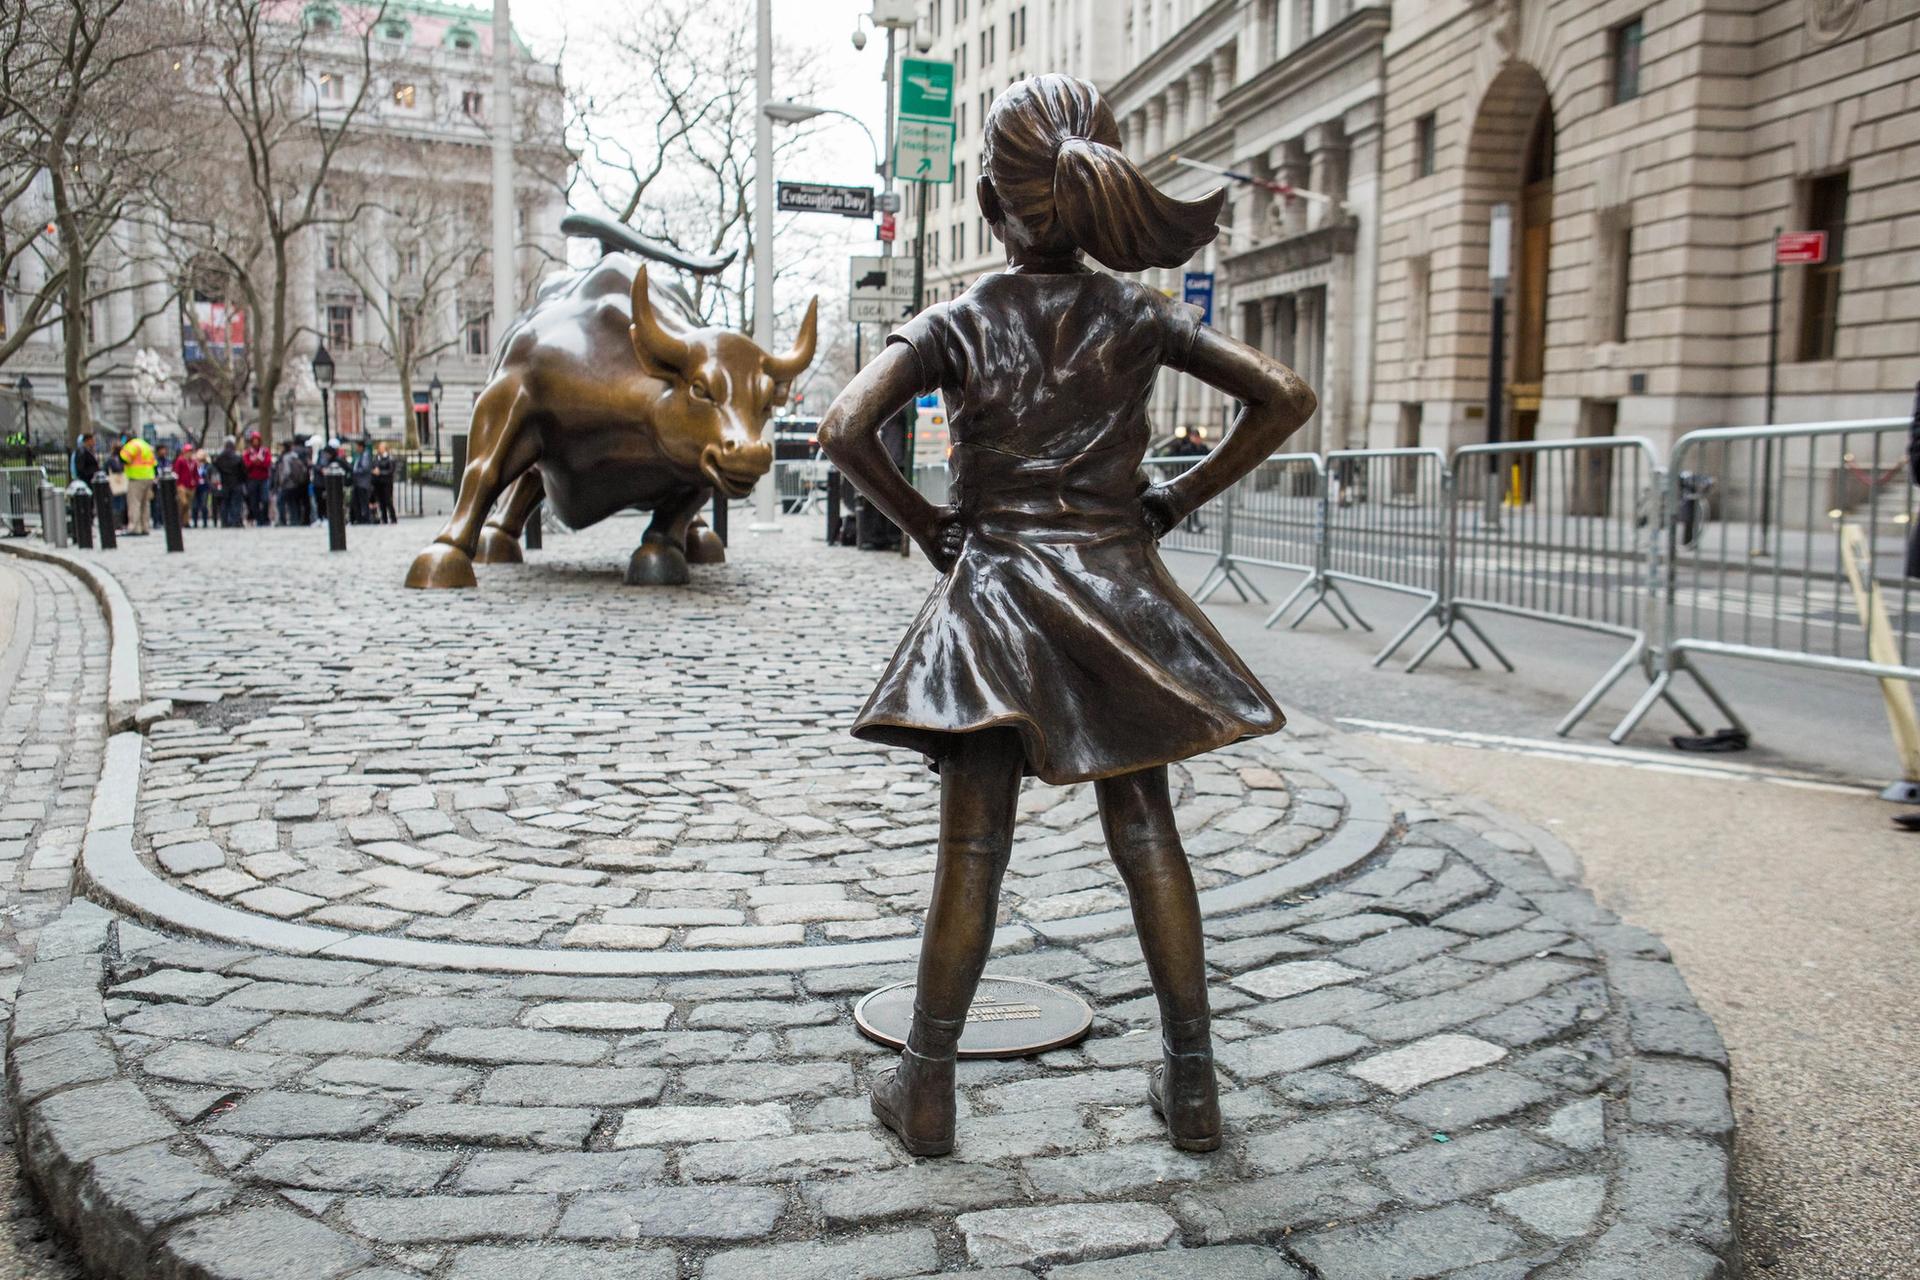 The Fearless Girl statue by Kristen Visbal faces the Charging Bull Anthony Quintano via Flickr